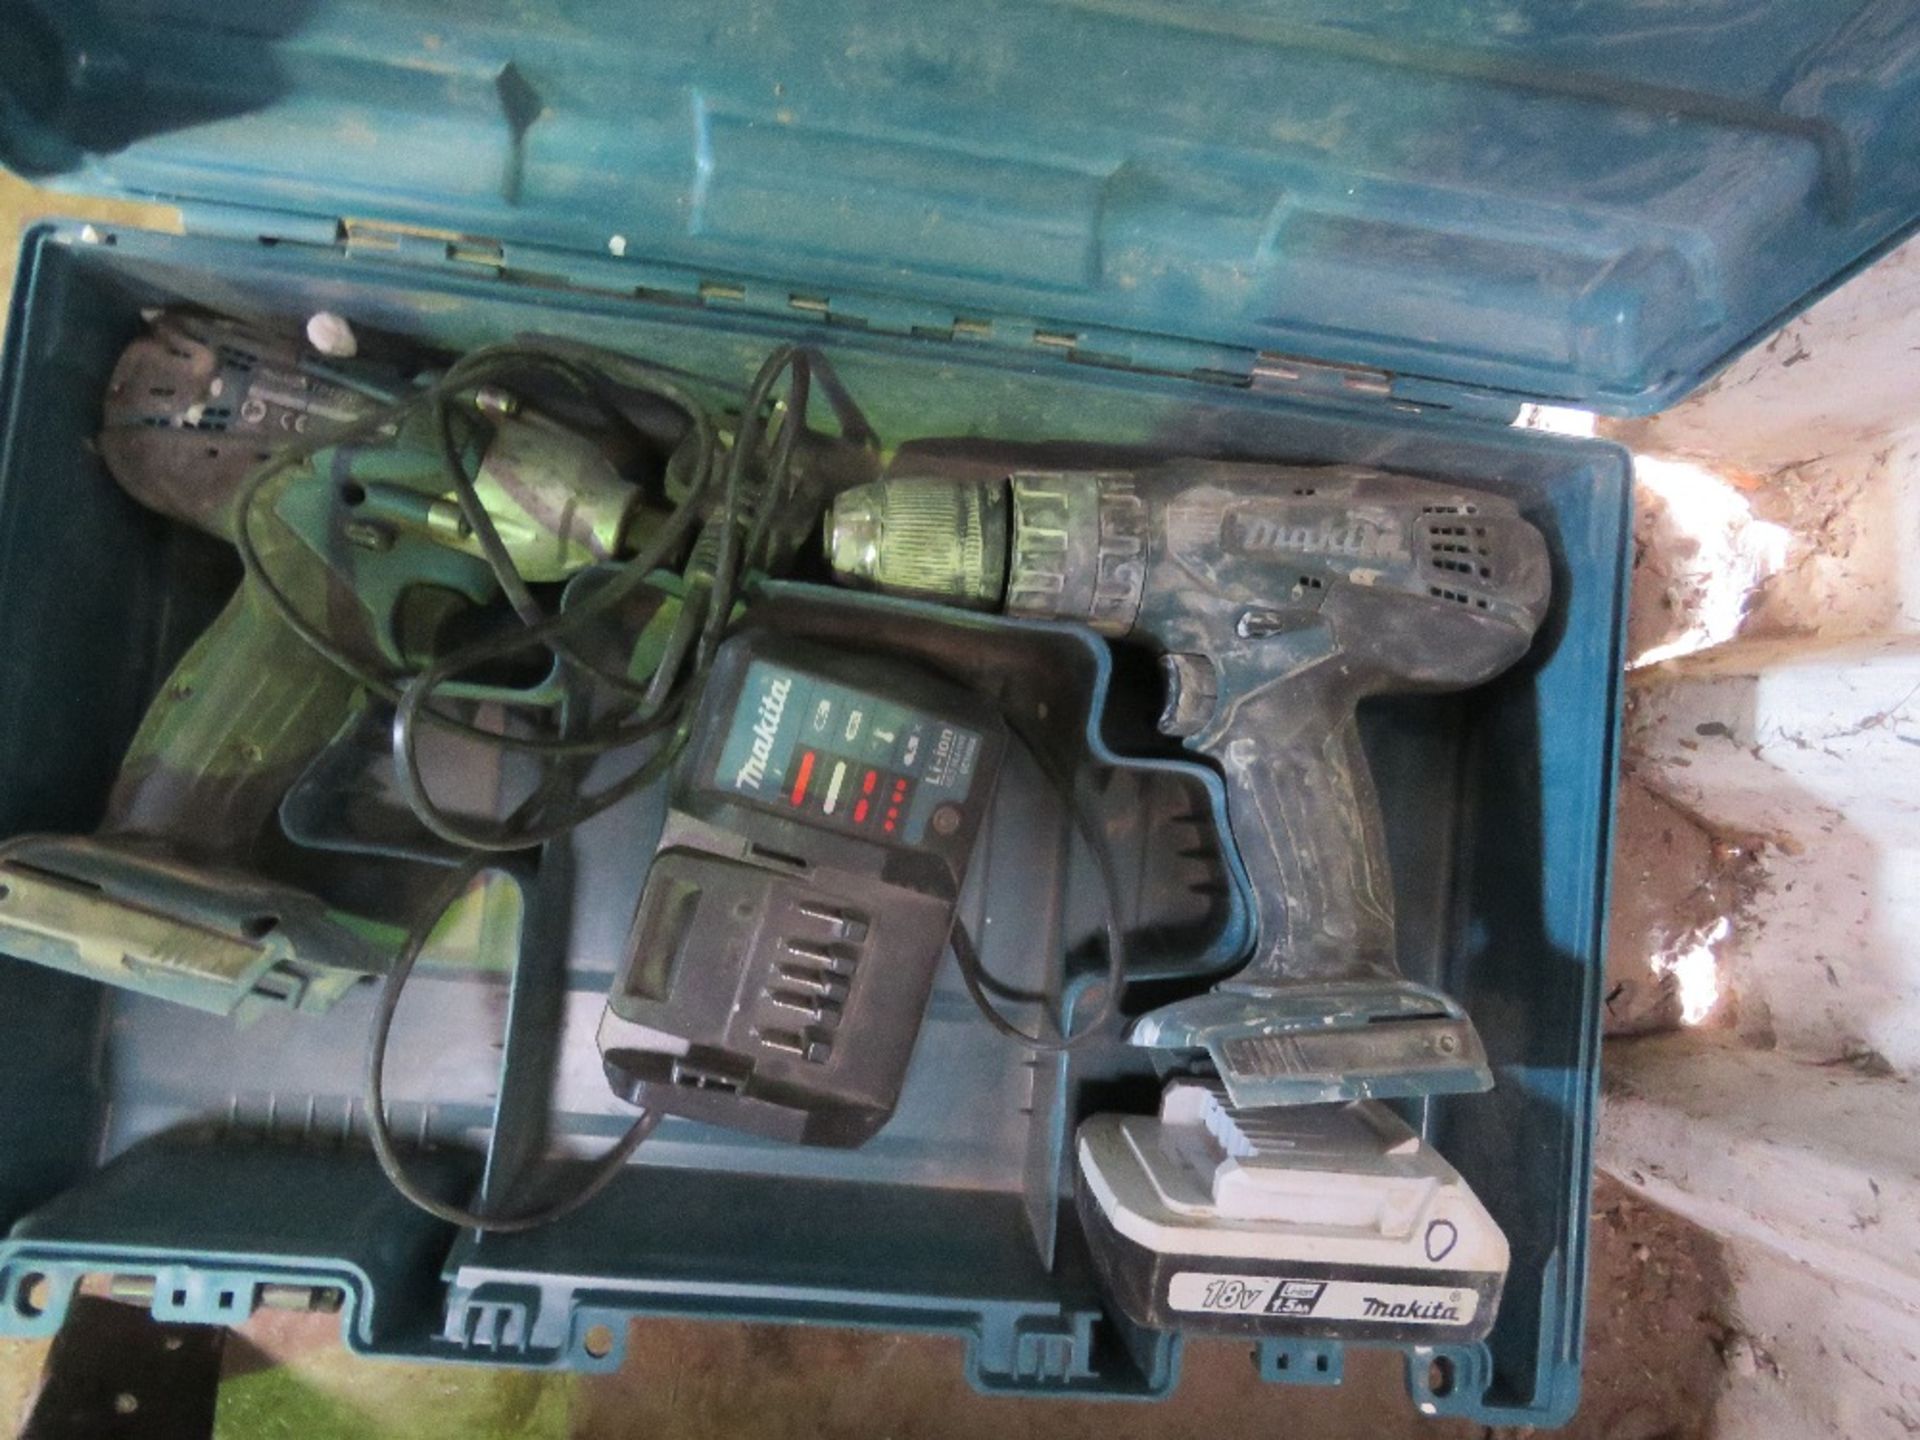 MAKITA BATTERY DRILL SET THIS LOT IS SOLD UNDER THE AUCTIONEERS MARGIN SCHEME, THEREFORE NO VAT W